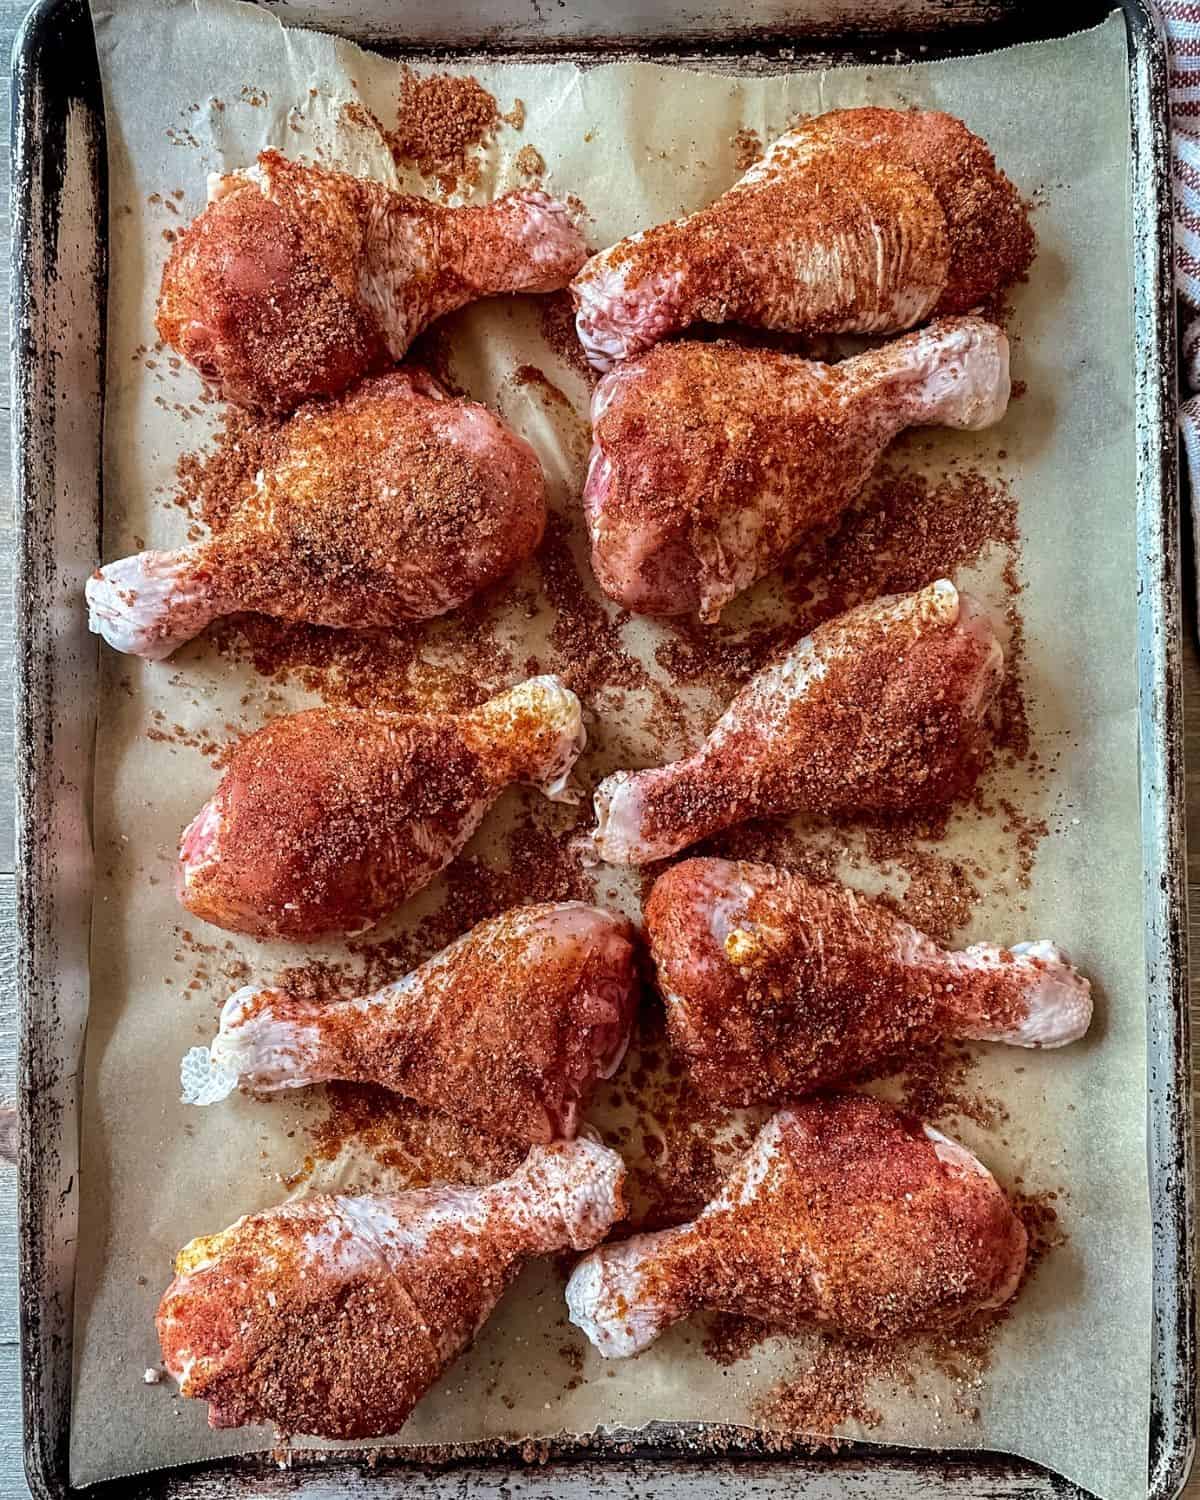 Uncooked chicken drumsticks coated in dry bbq seasoning on a sheet pan.